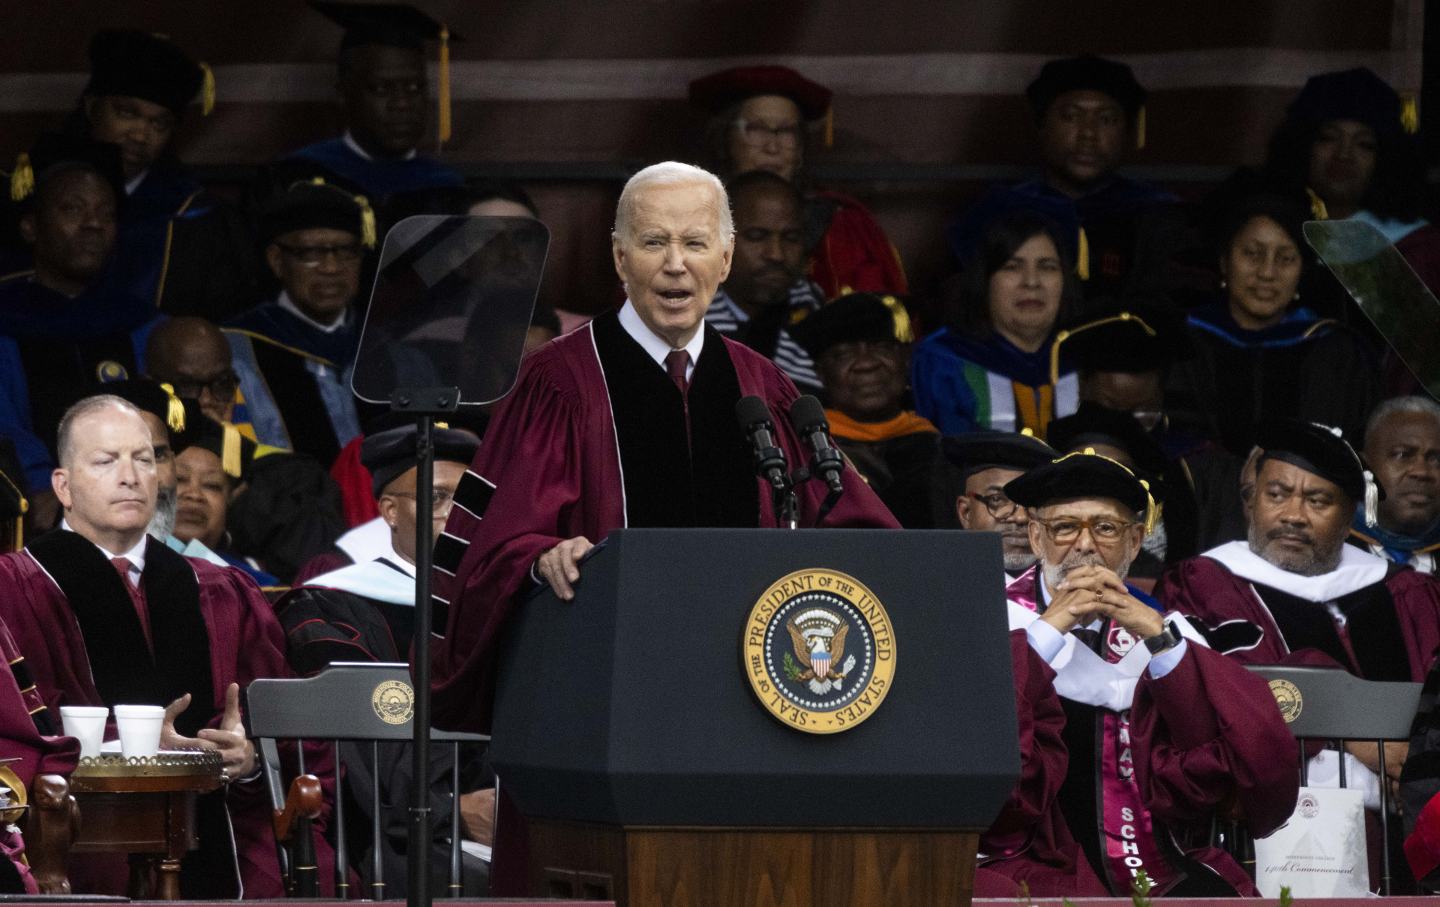 Joe Biden in academic regalia, in front of a crowd of university faculty and staff, giving the commencement address at Morehouse College.